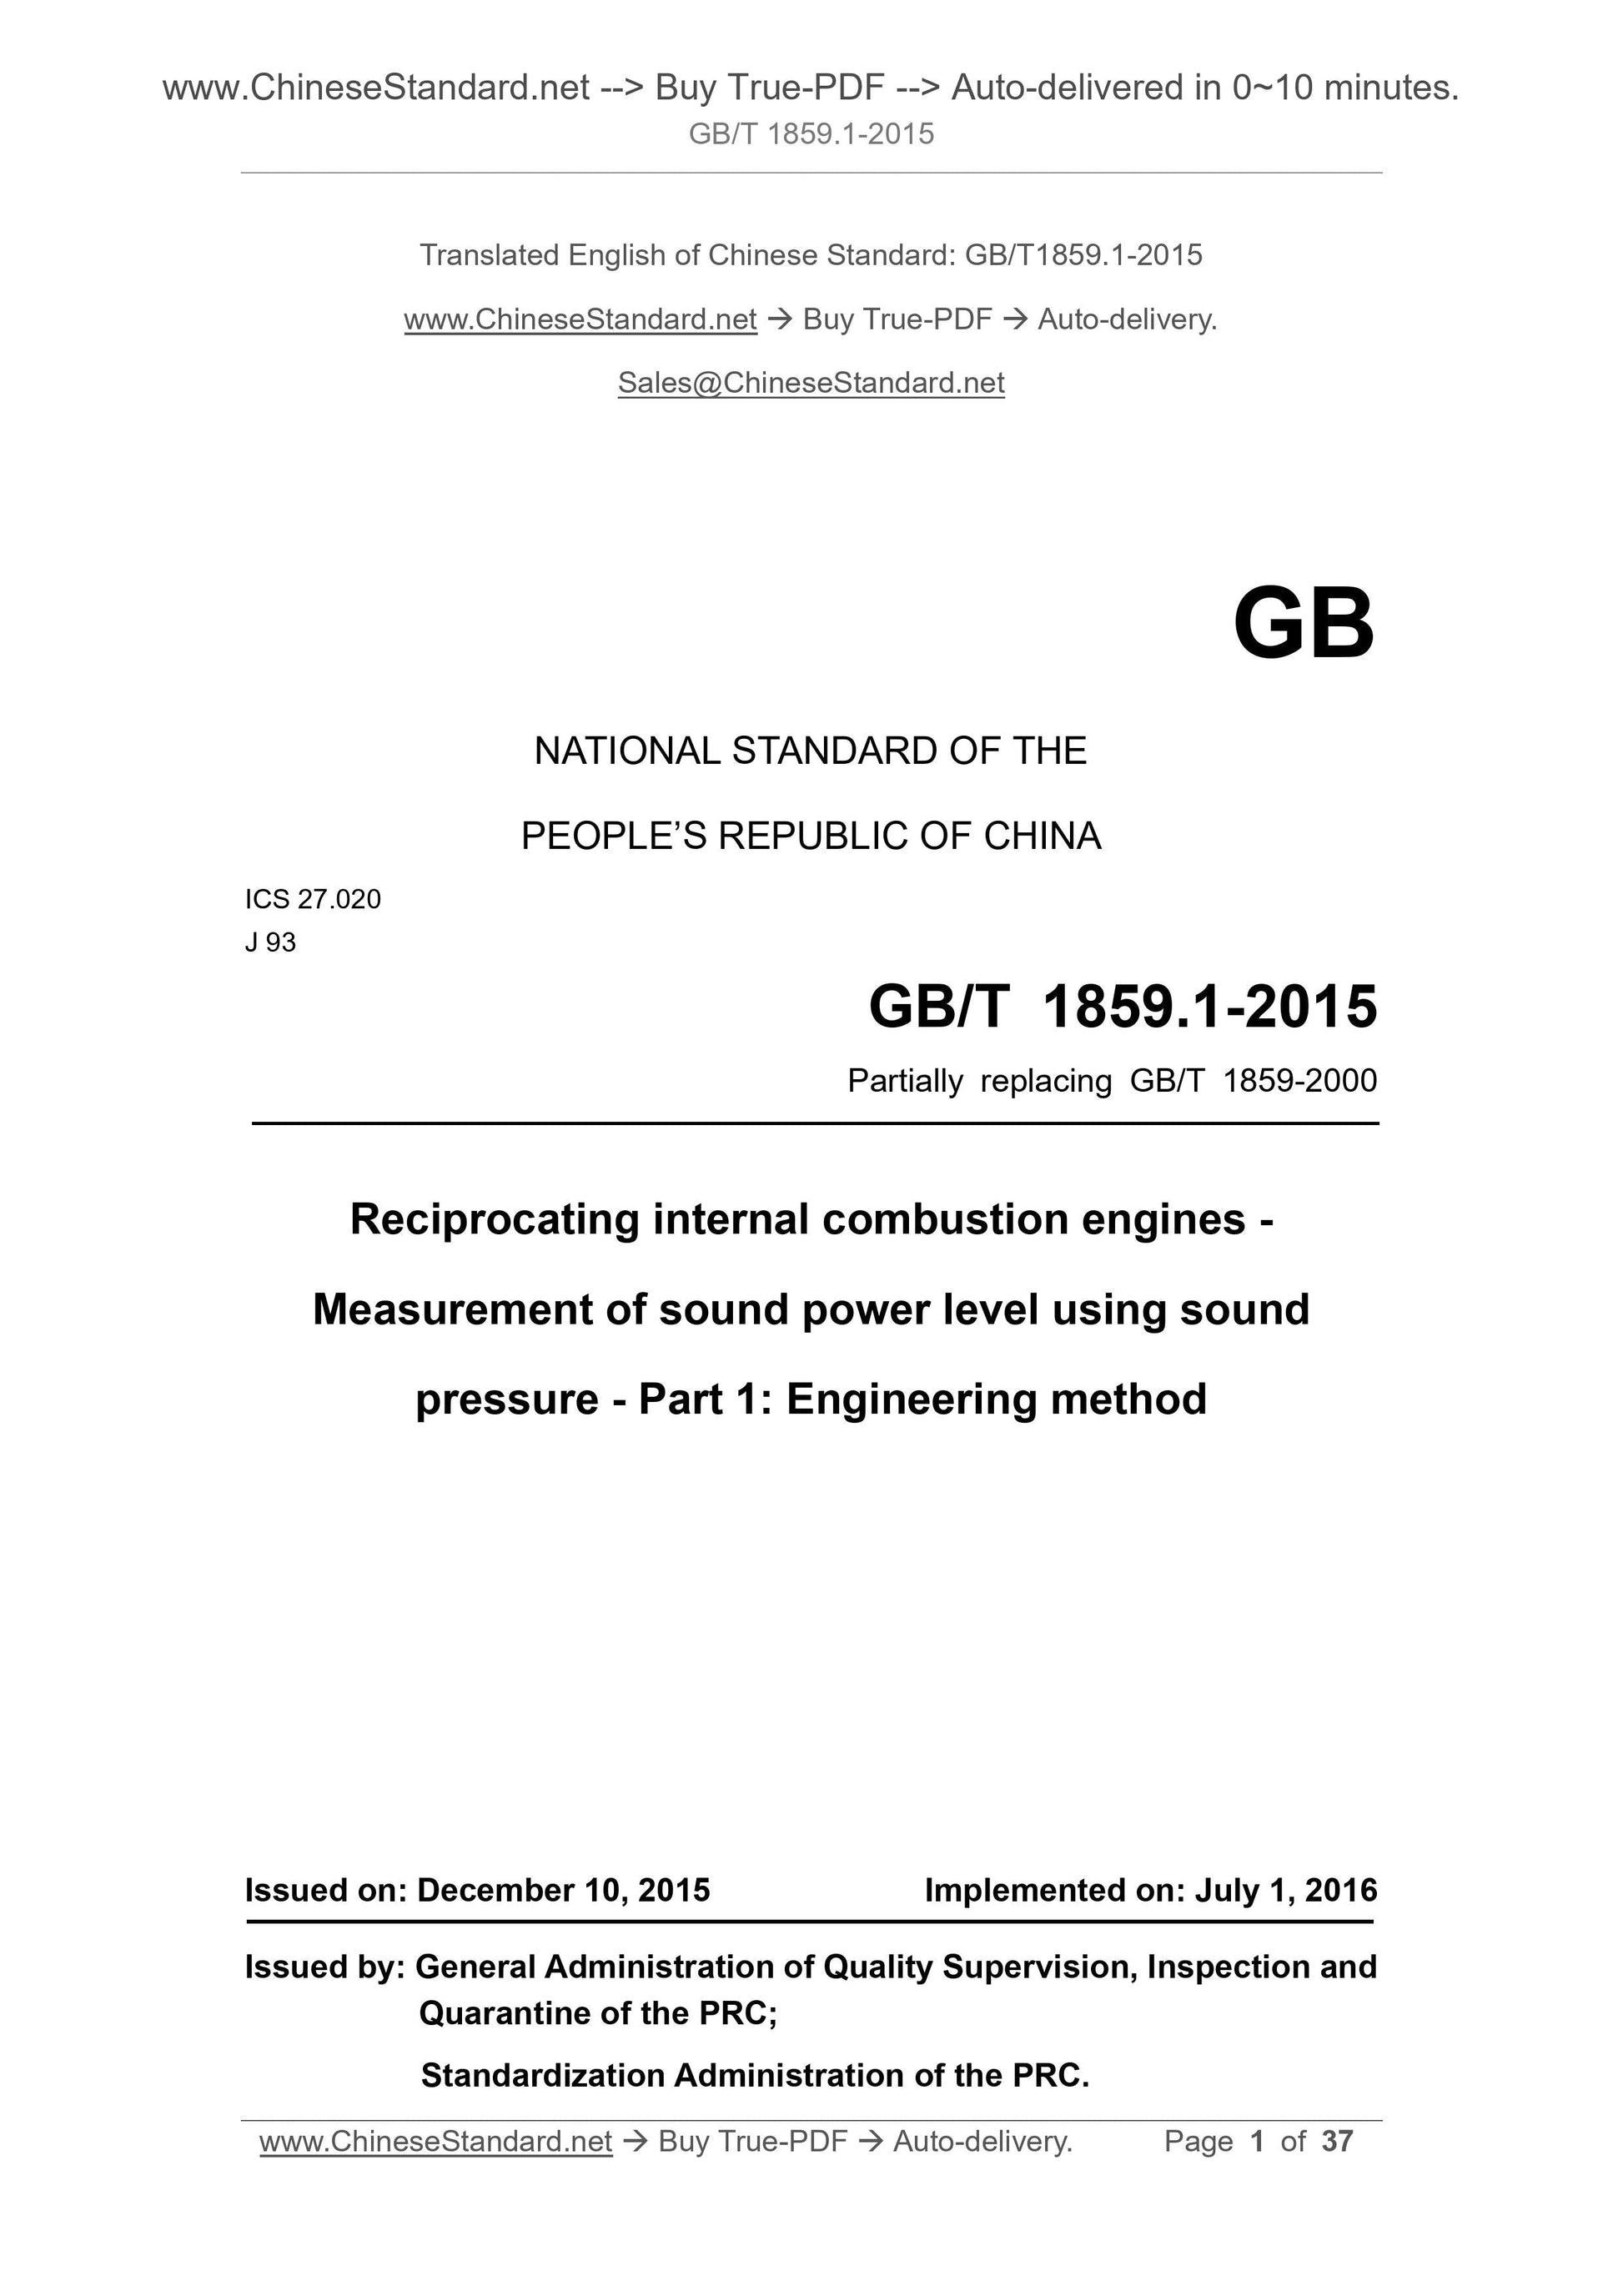 GB/T 1859.1-2015 Page 1